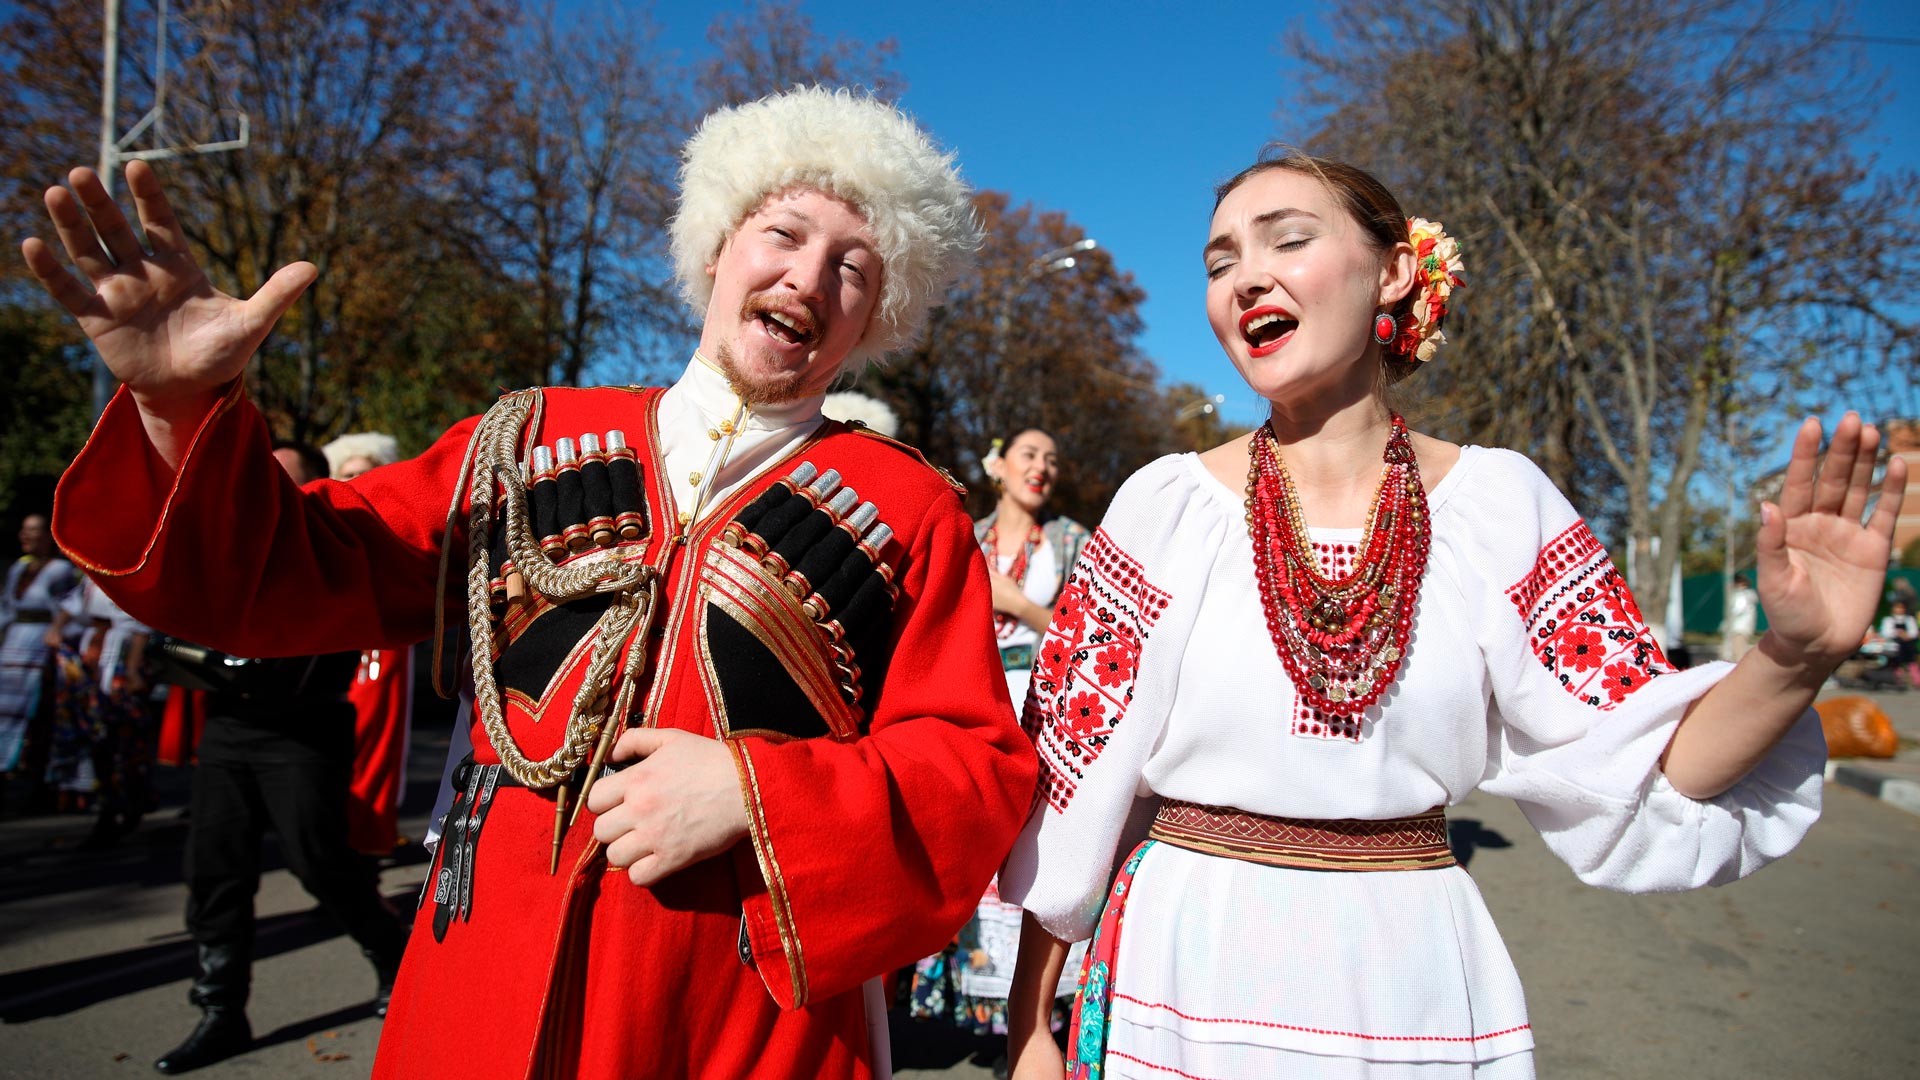 The Cossack song ensemble "Krinitsa" at the festival of Cossack culture "Alexander Fortress" in Krasnodar Territory.